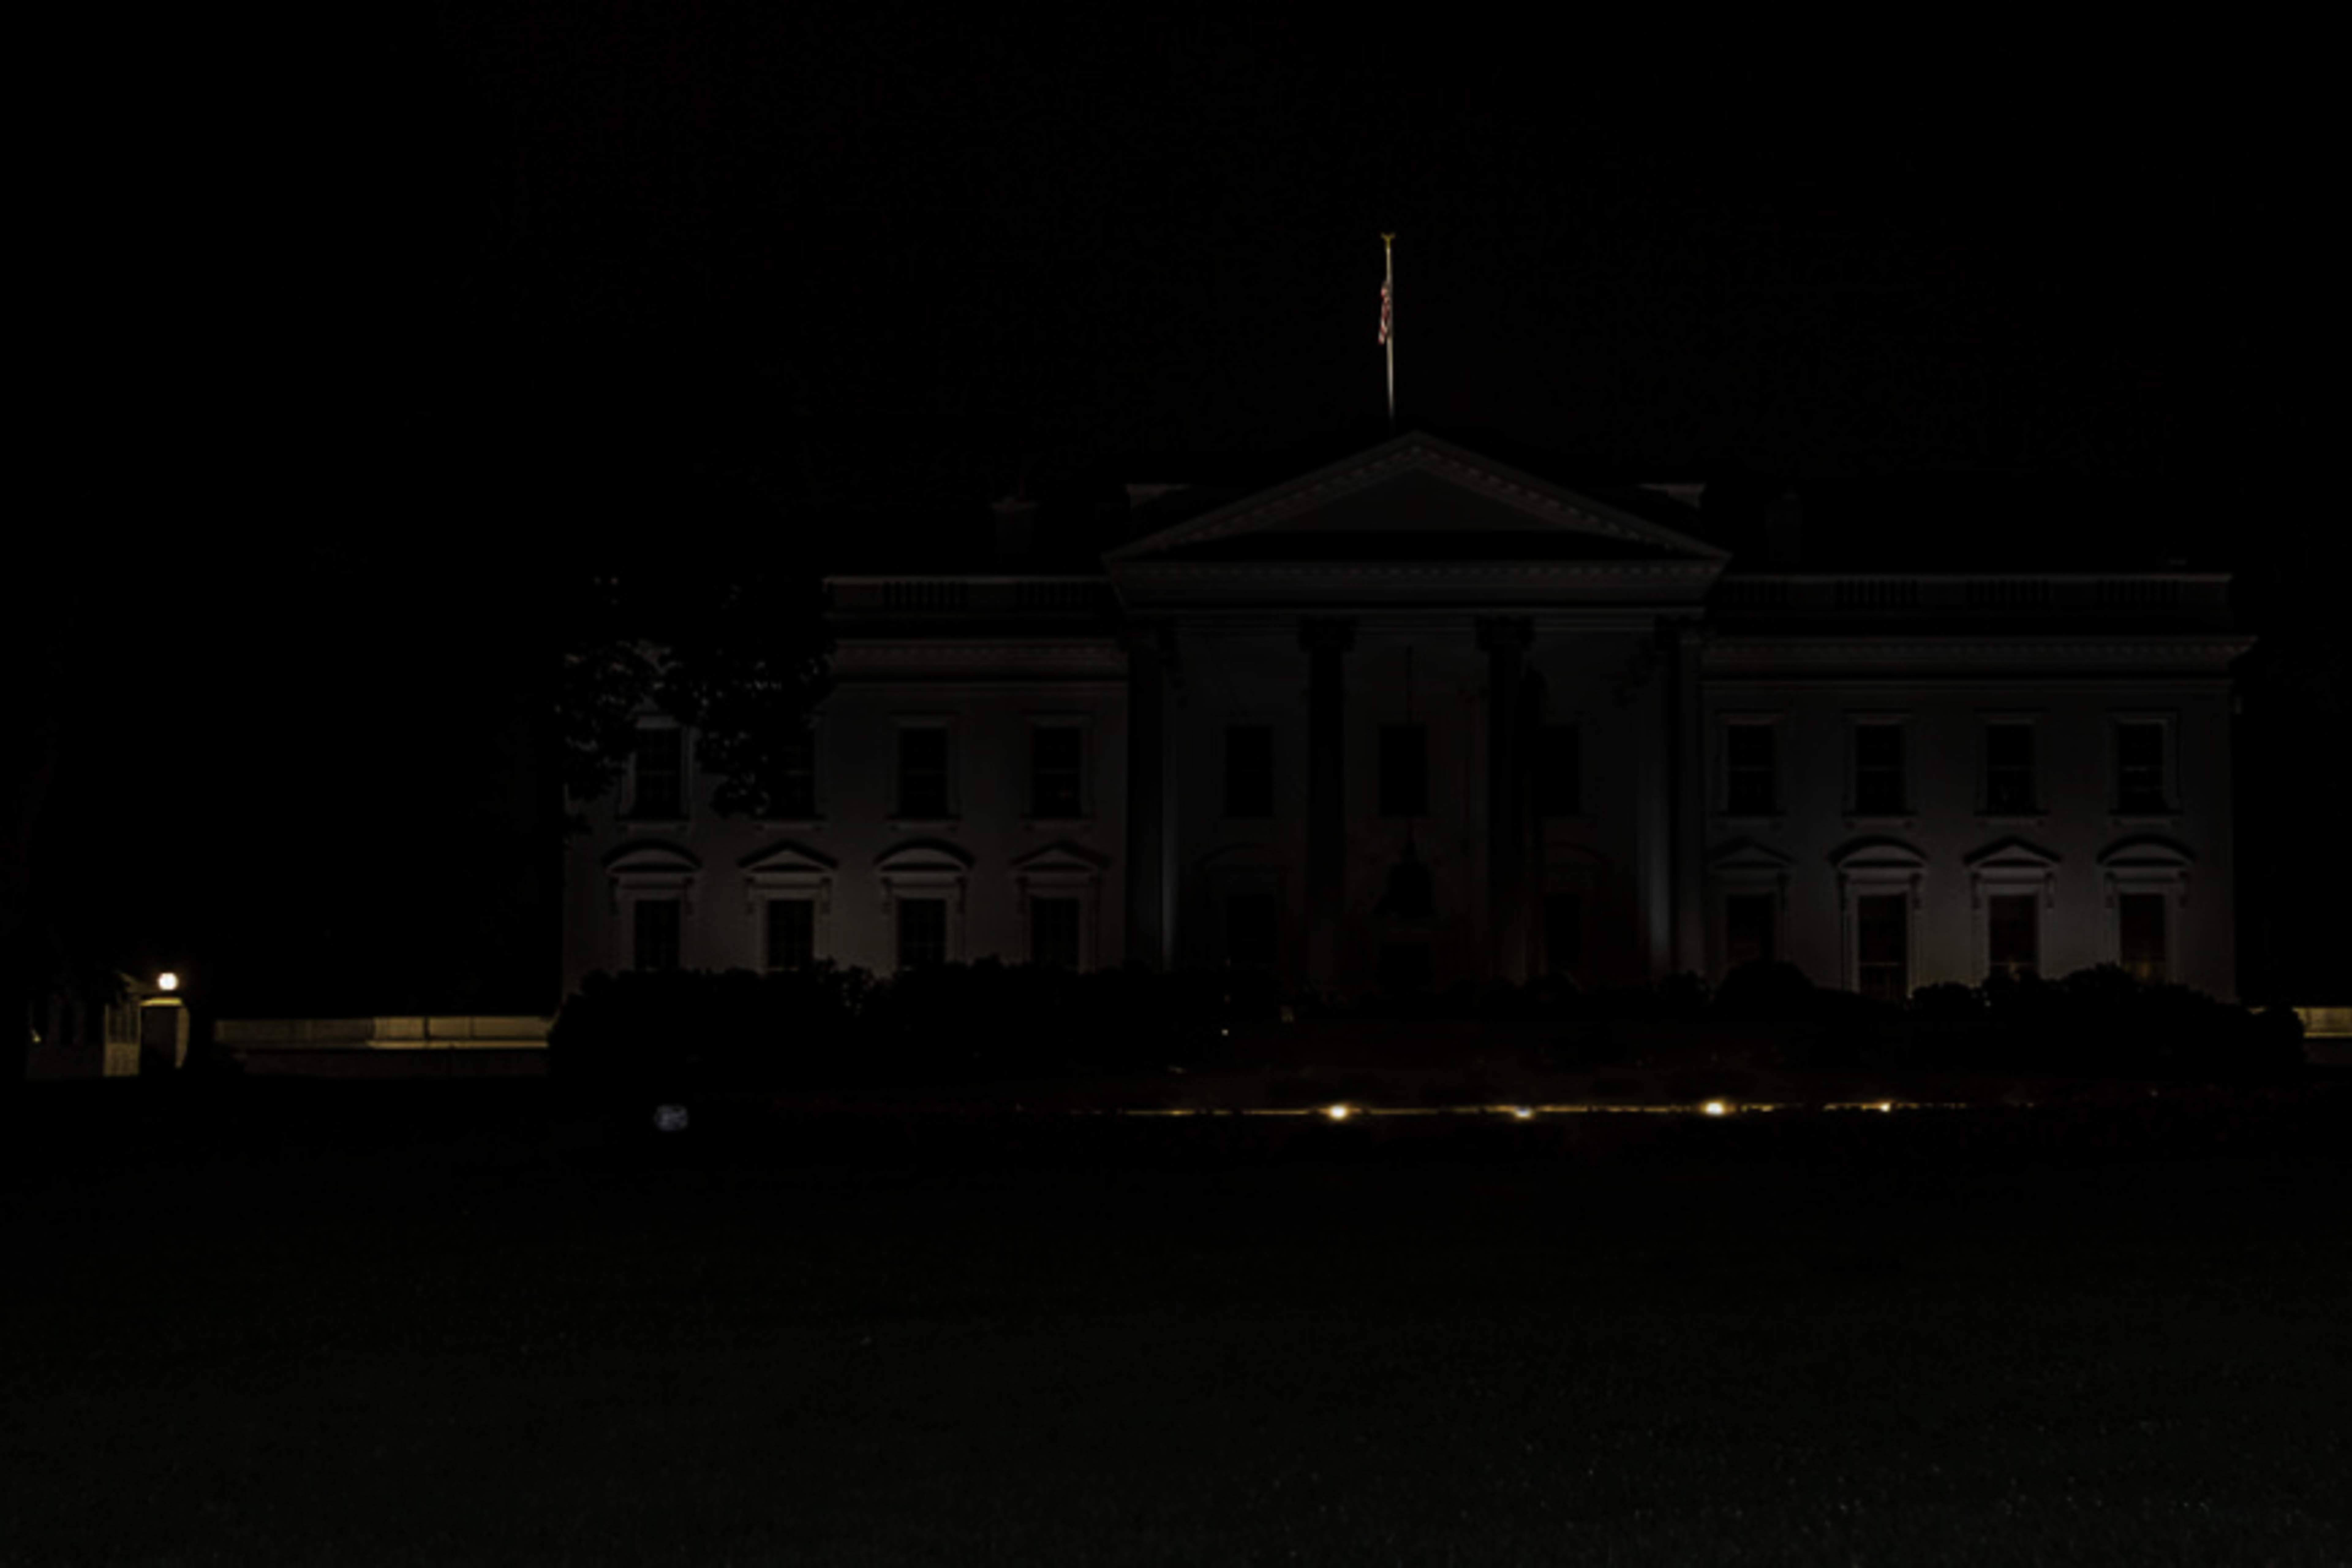 The White House in complete darkness